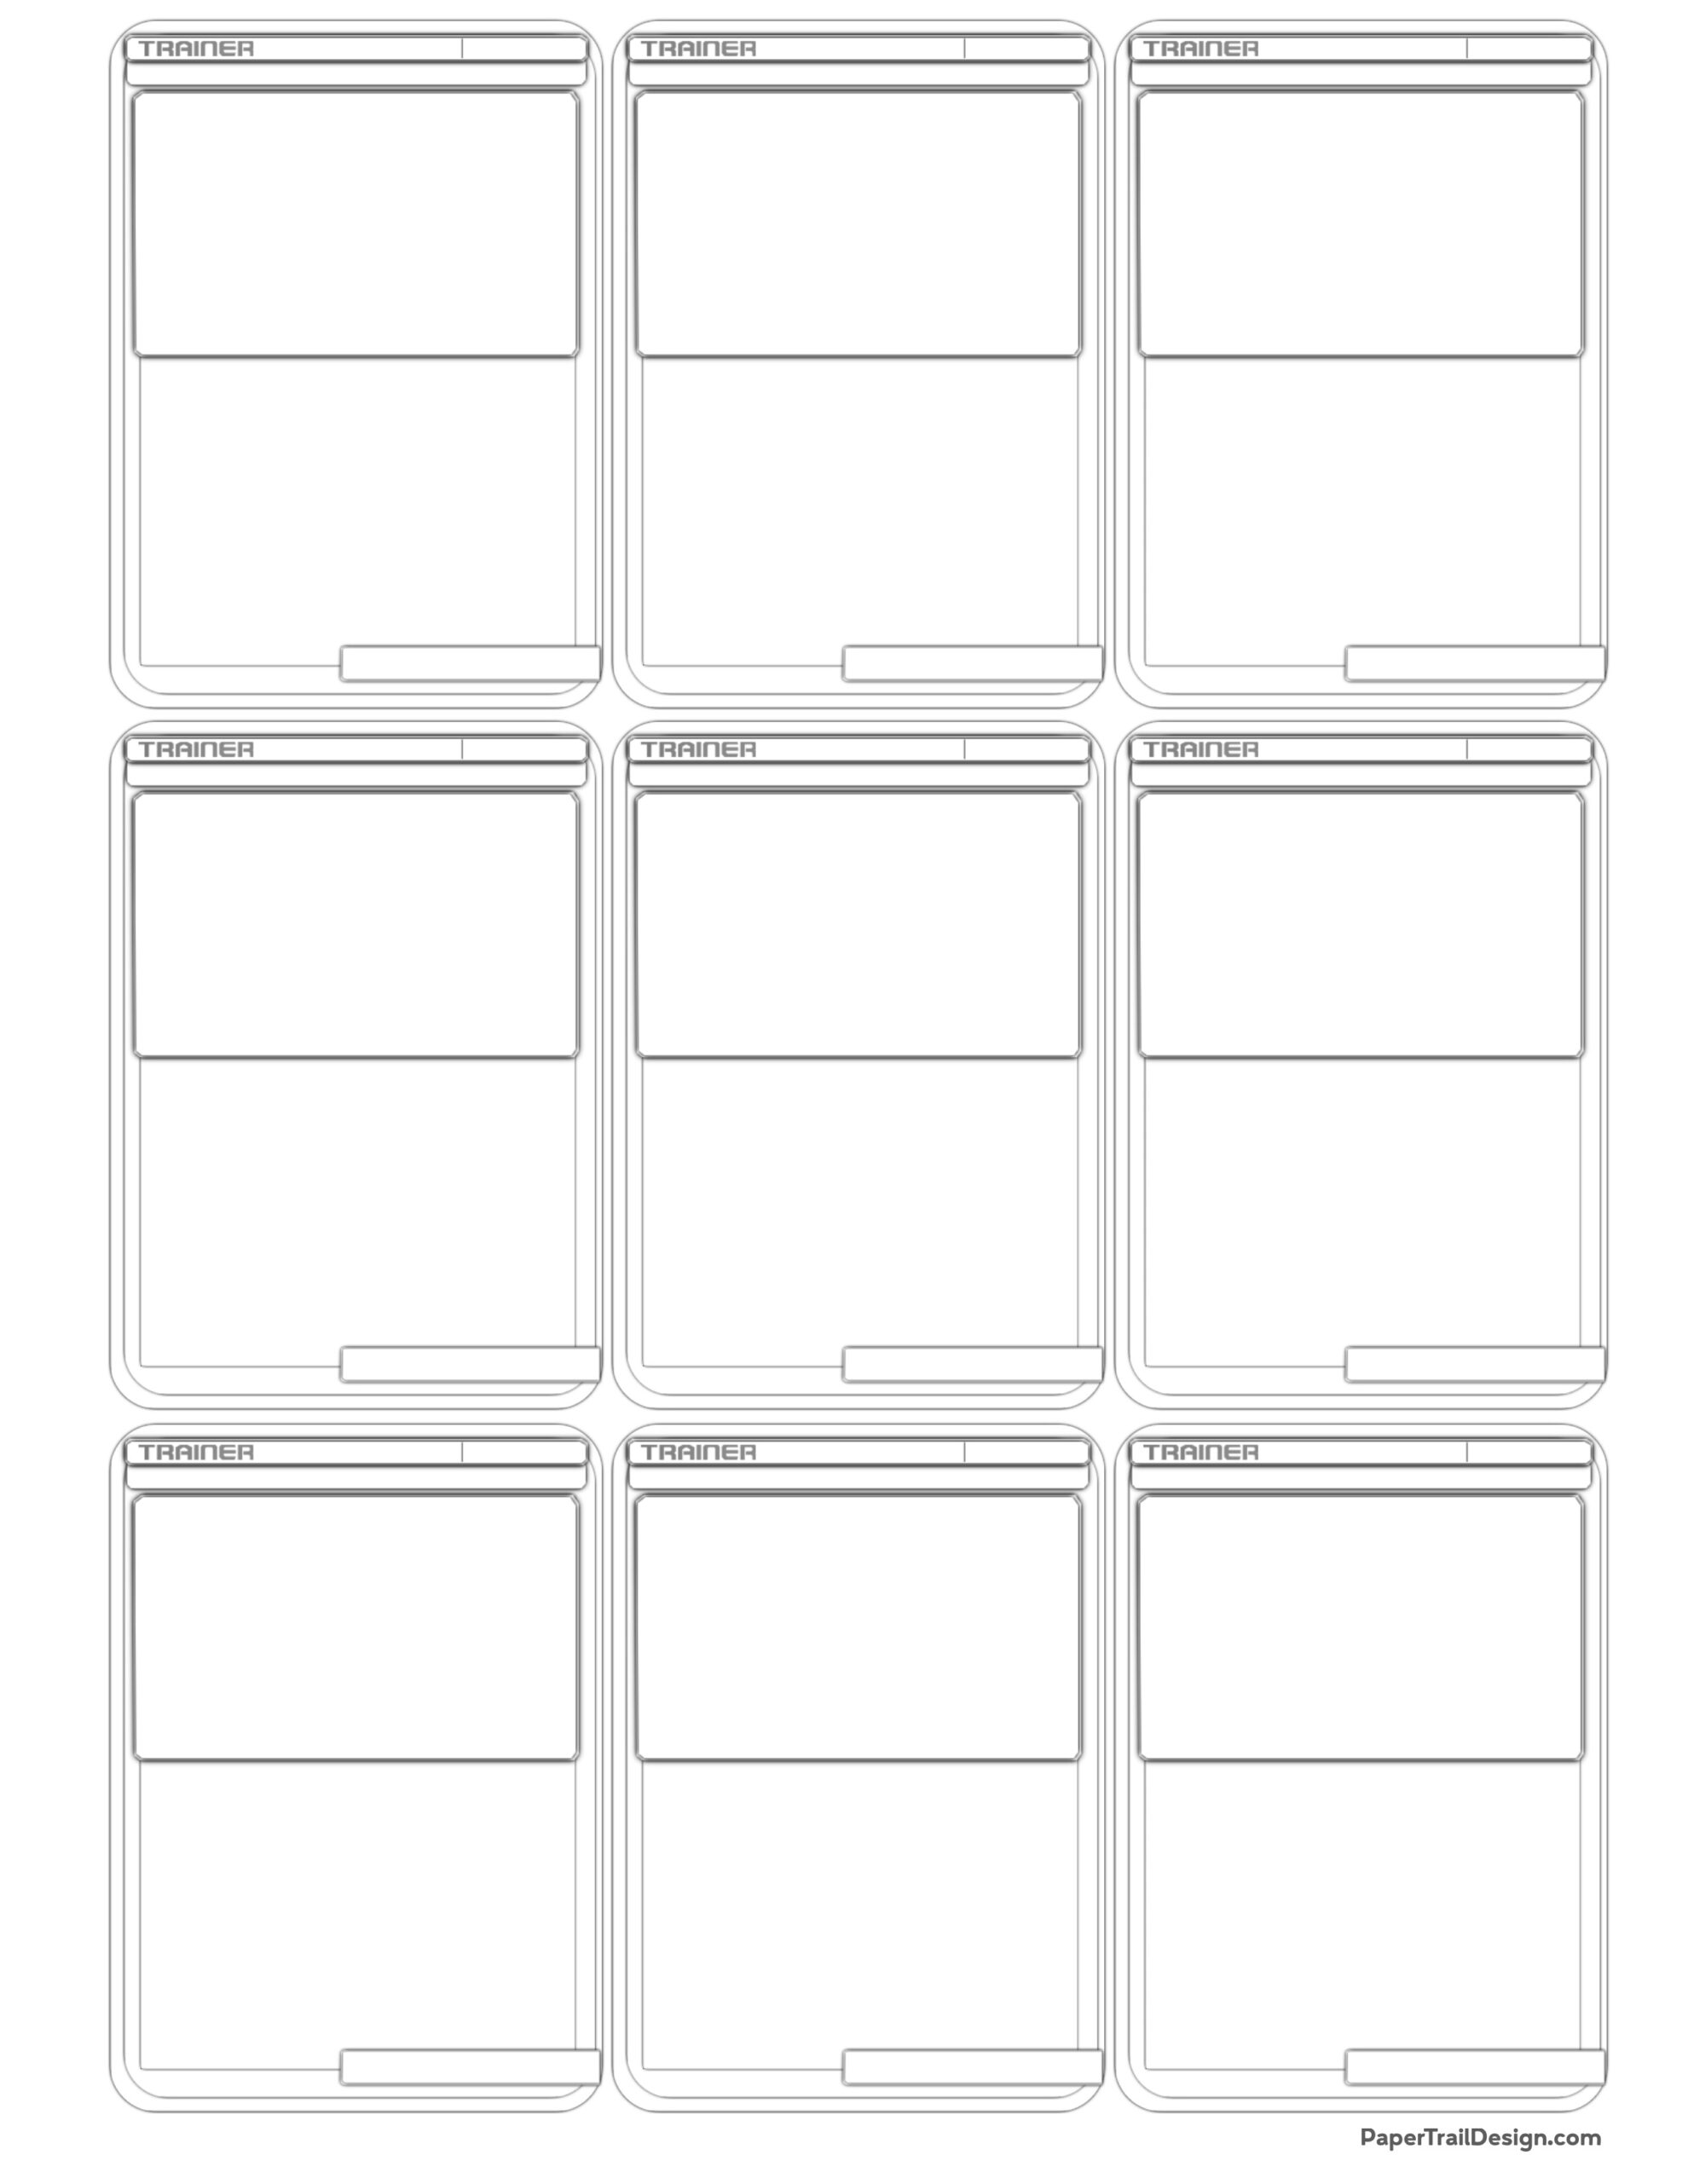 Pokémon Card Template Free Printable - Paper Trail Design Pertaining To Pokemon Trainer Card Template